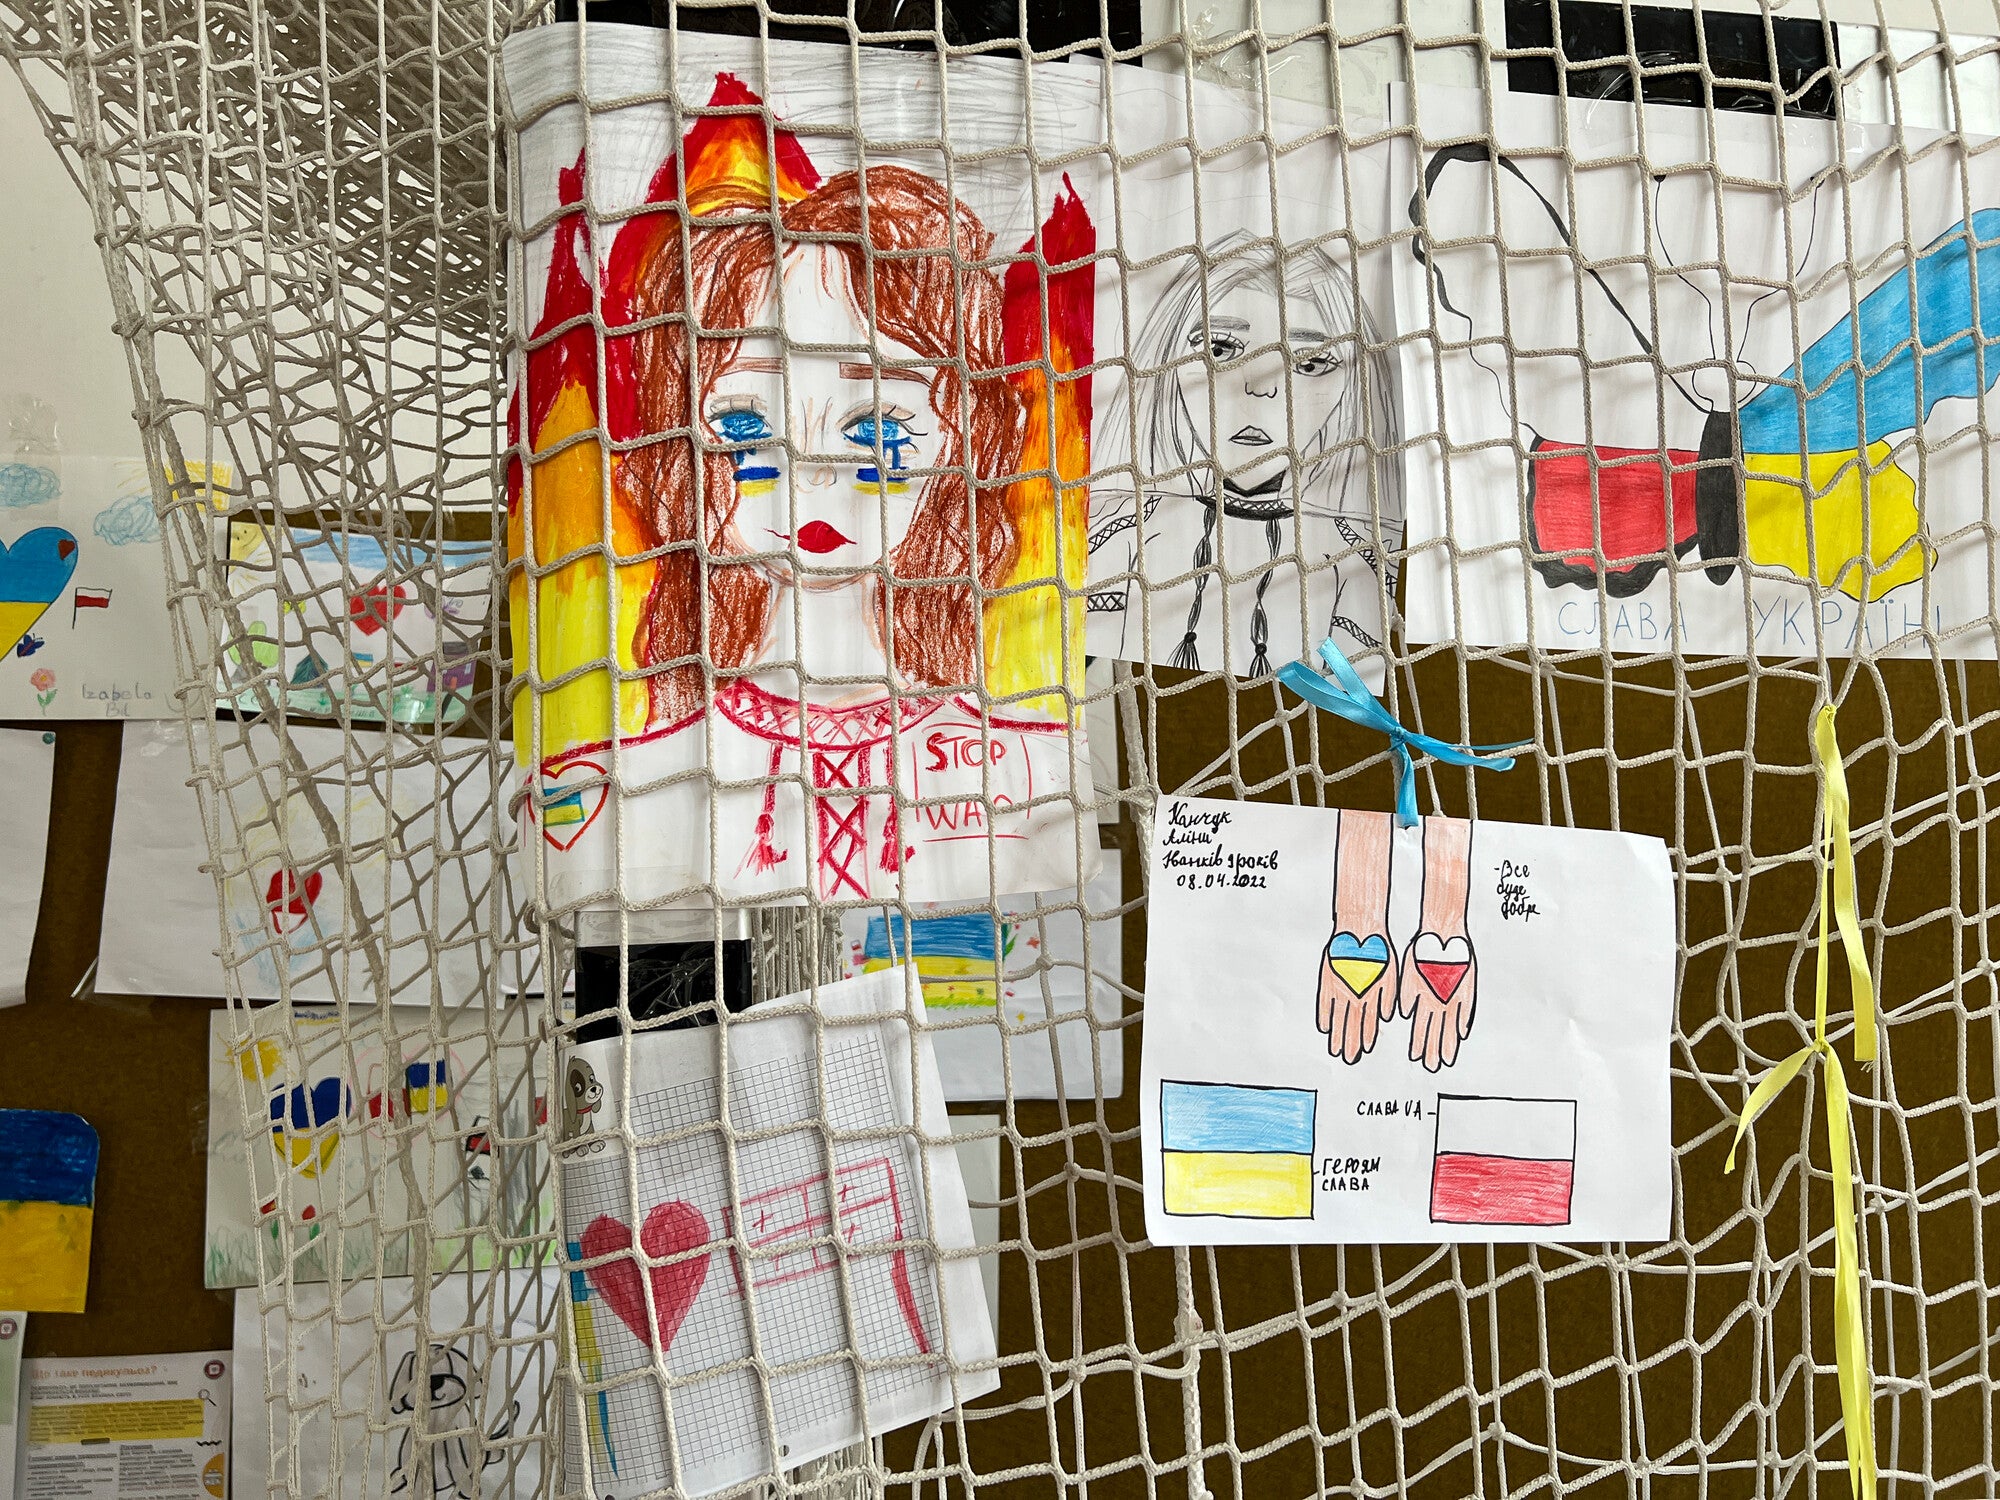 drawings by Ukrainian refugee children that were informally displayed at an arts and crafts station in a converted school gym